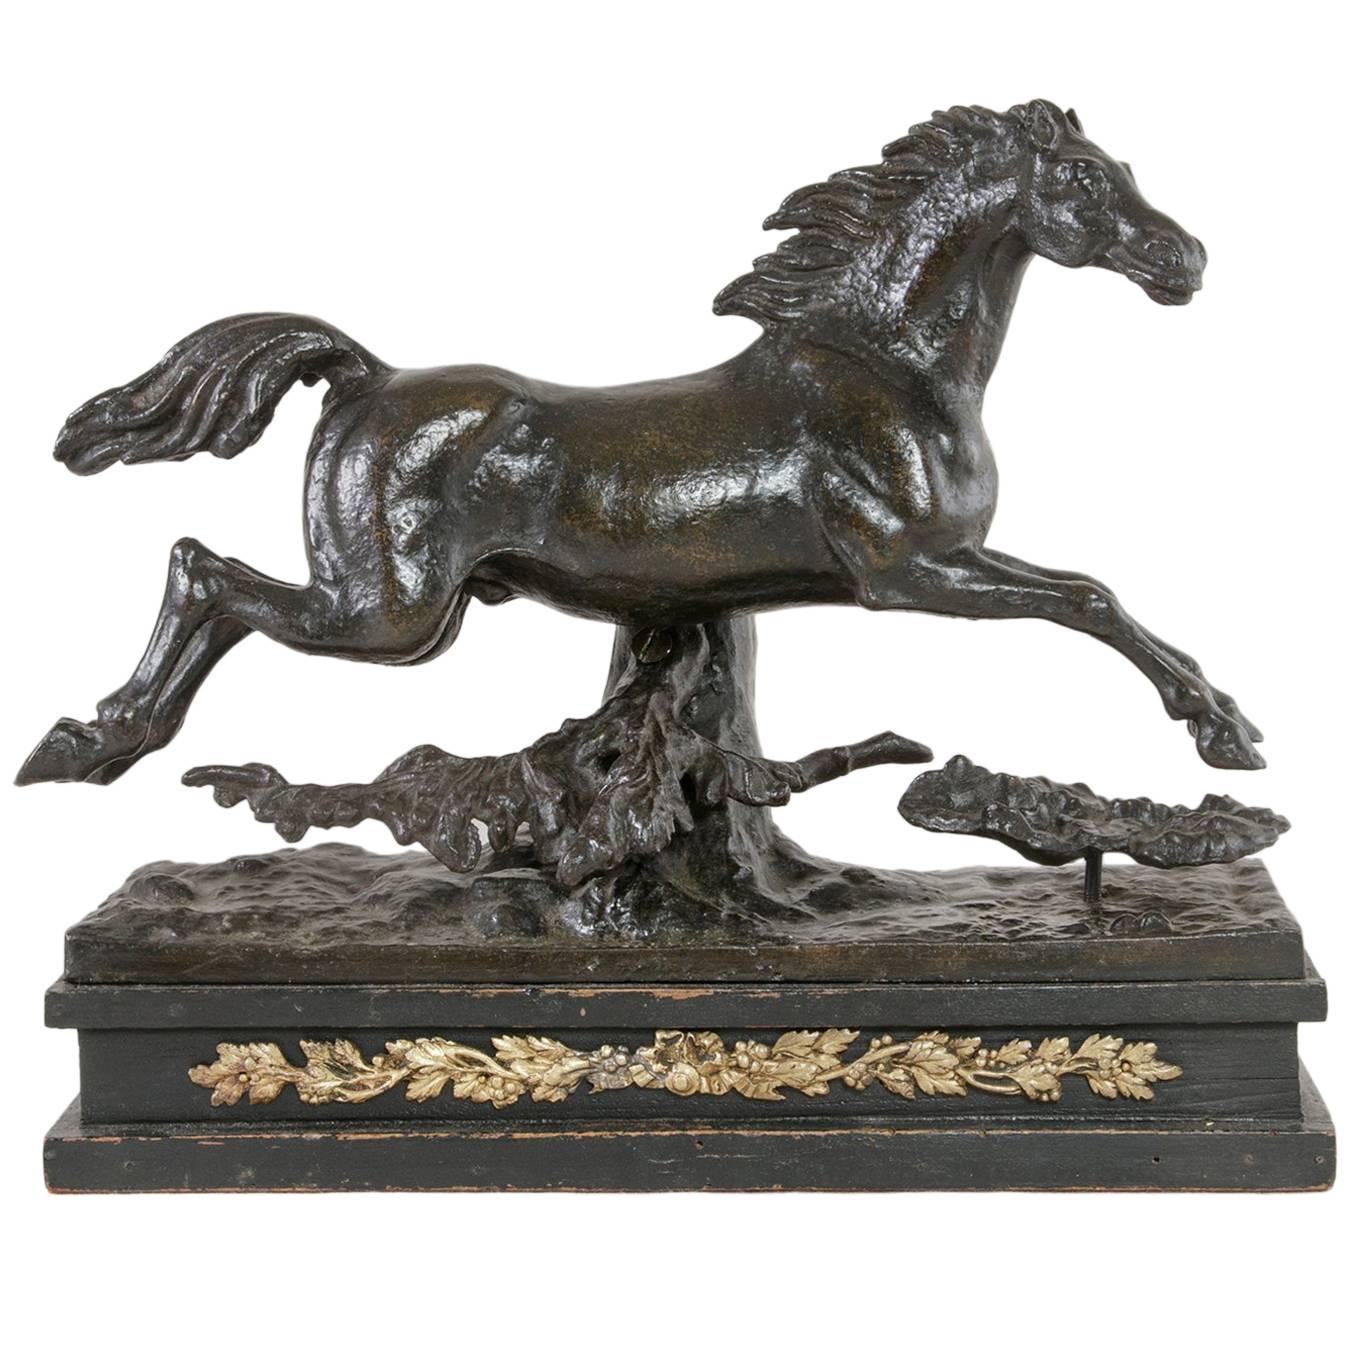 19th Century French Napoleon III Period Cast Iron Horse Sculpture on Wooden Base